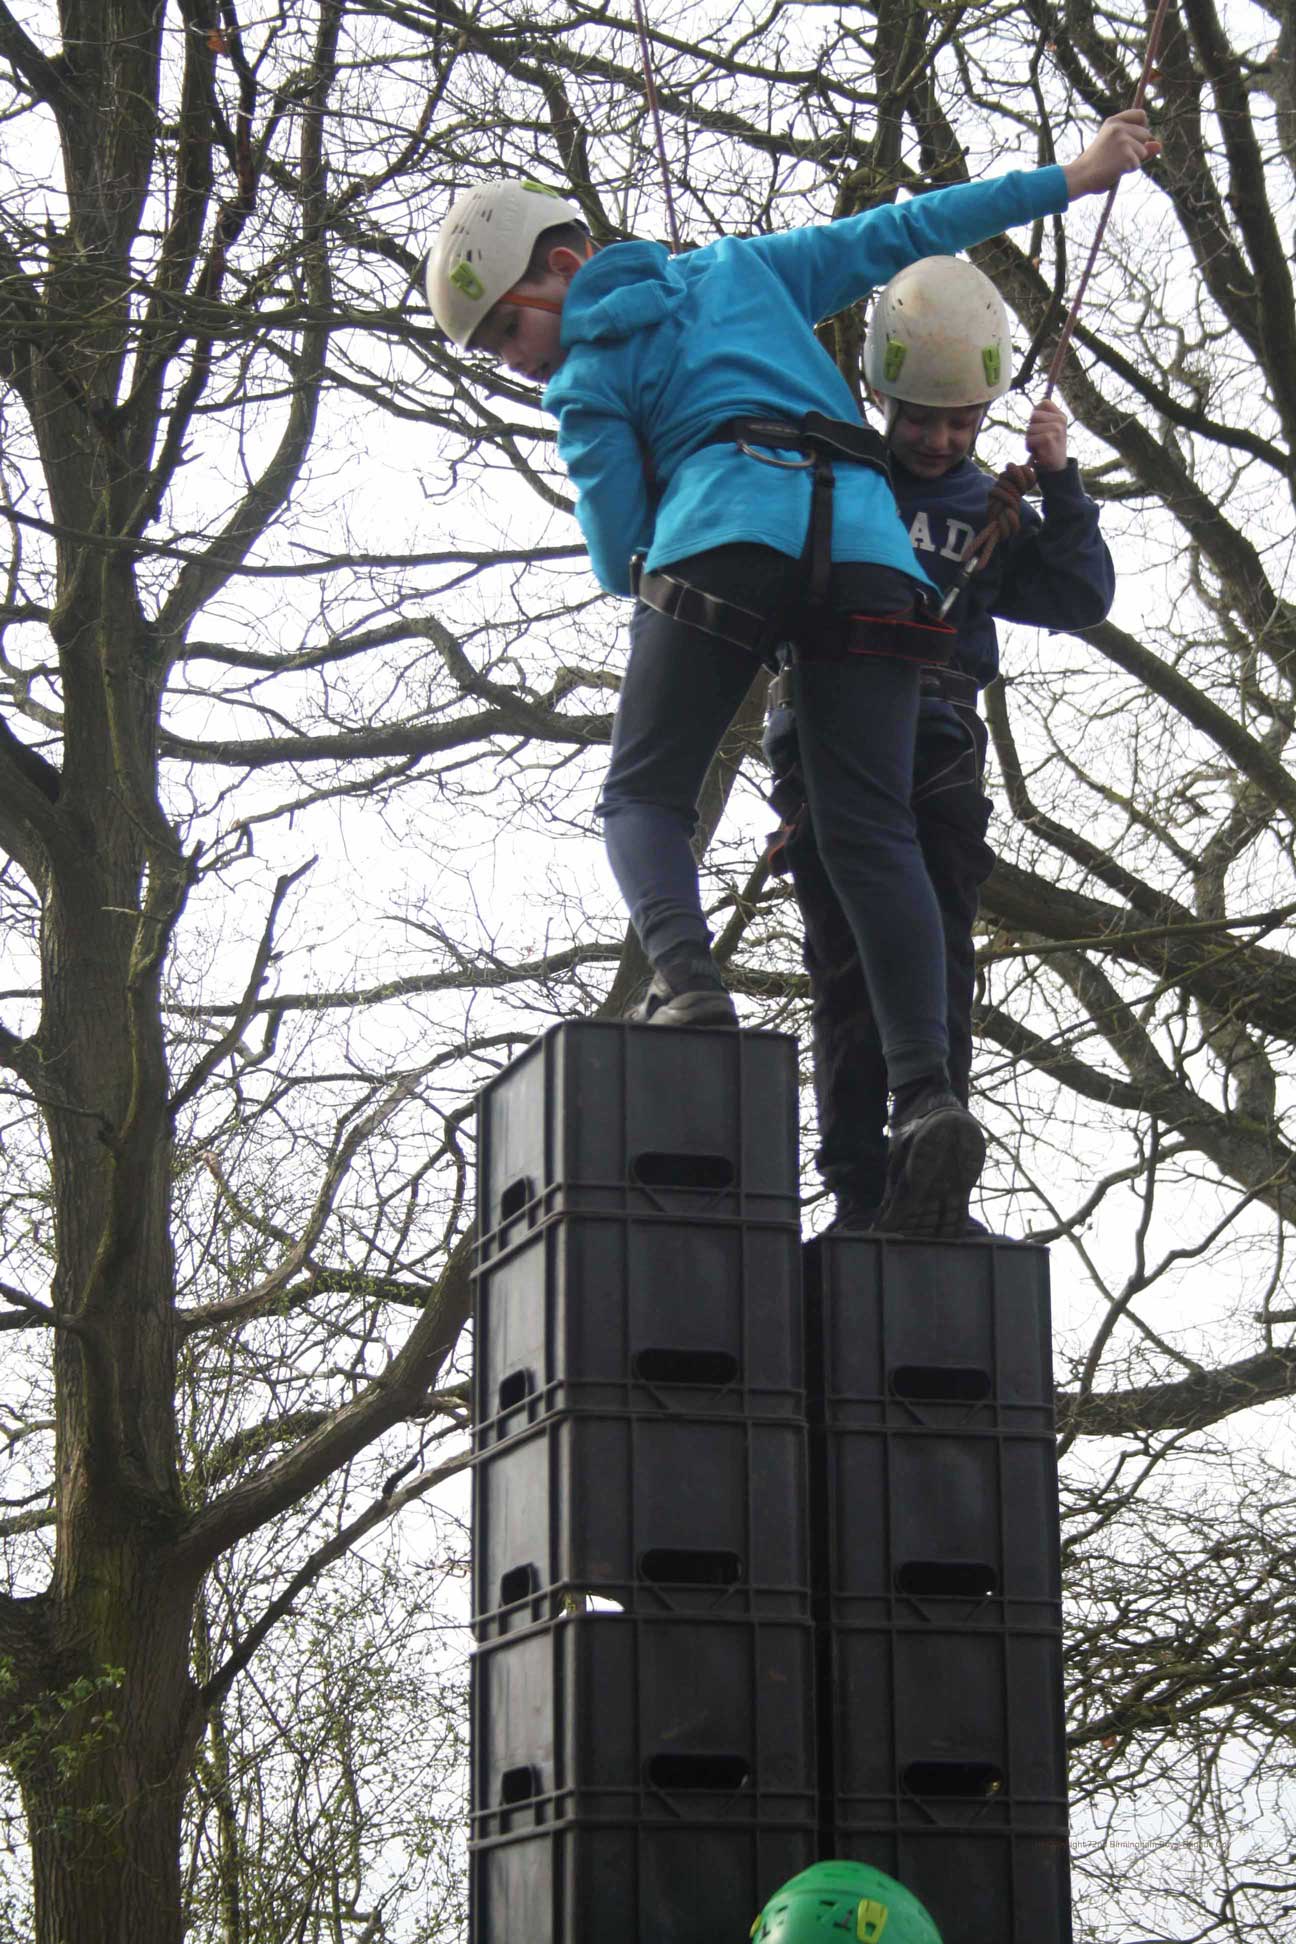 Boys doing crate stacking in 2019